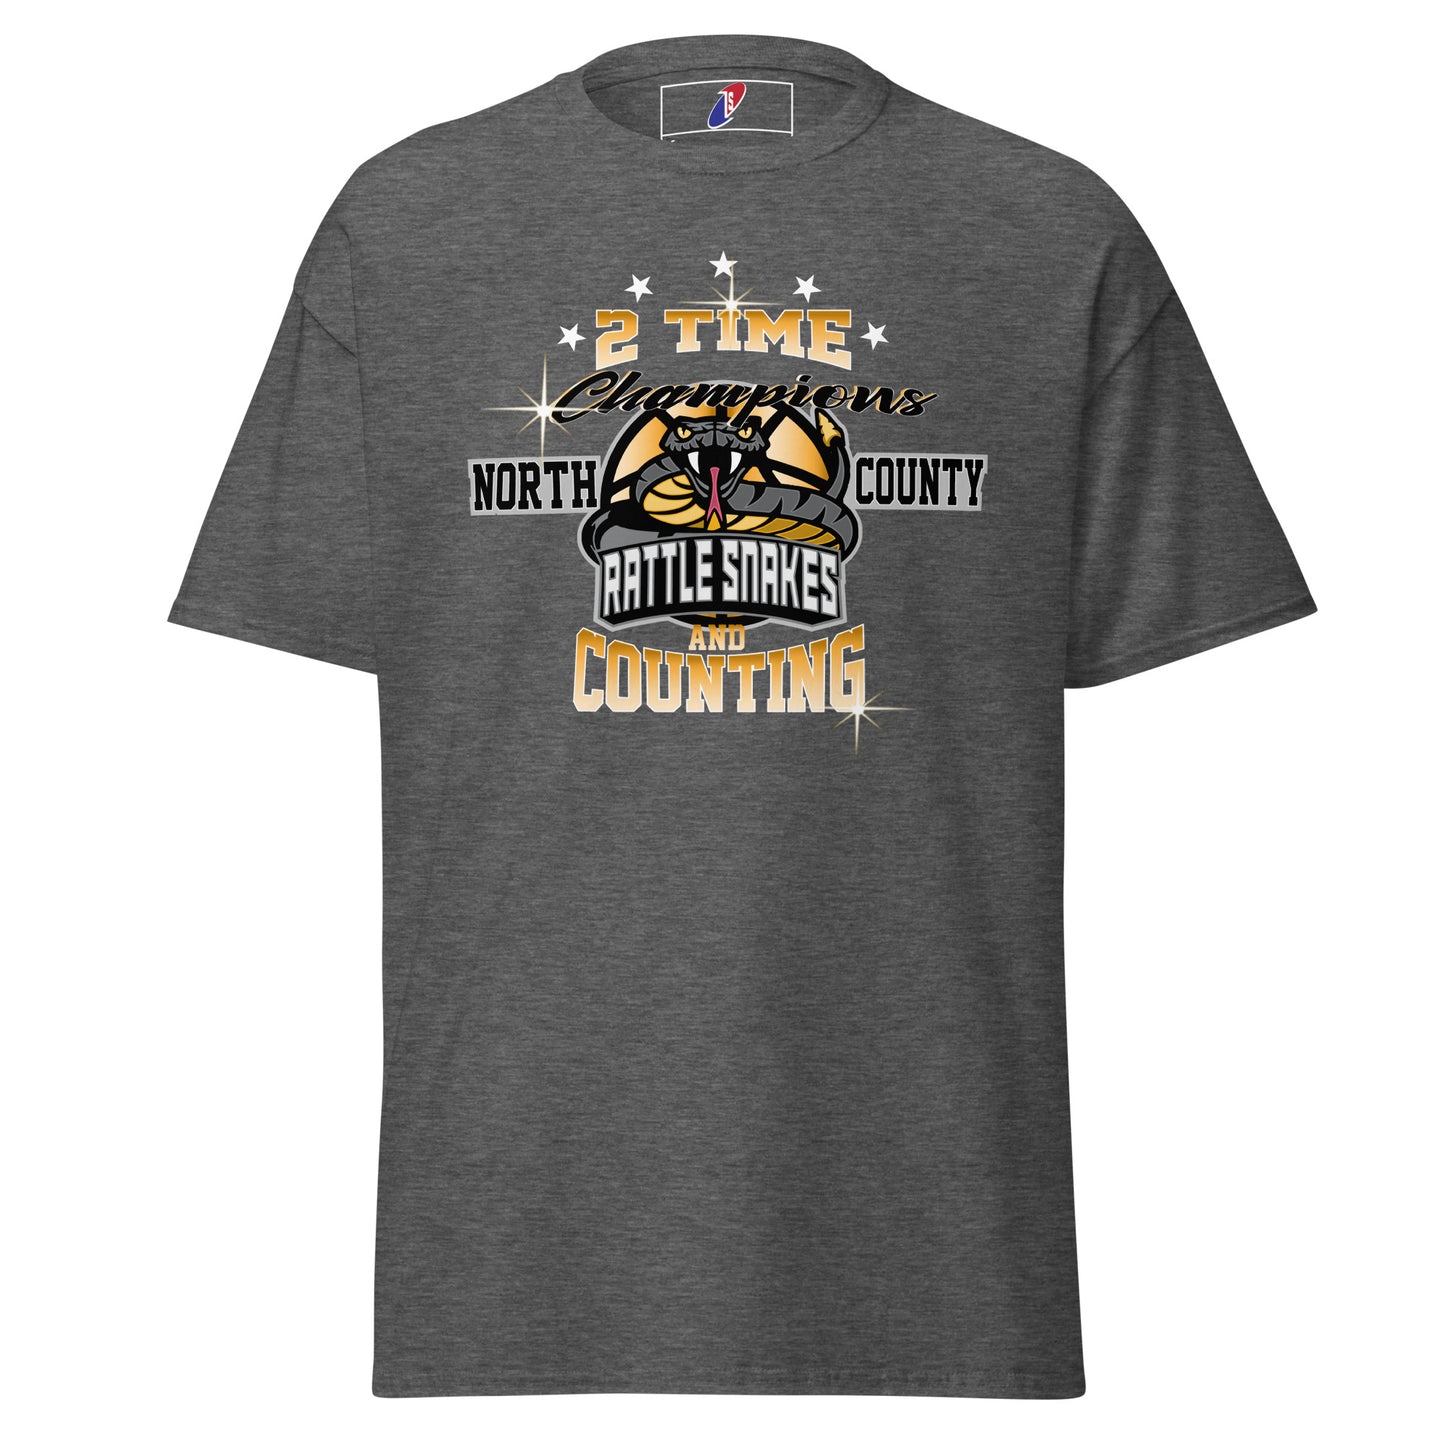 Rattle Snakes Championship Classic tee